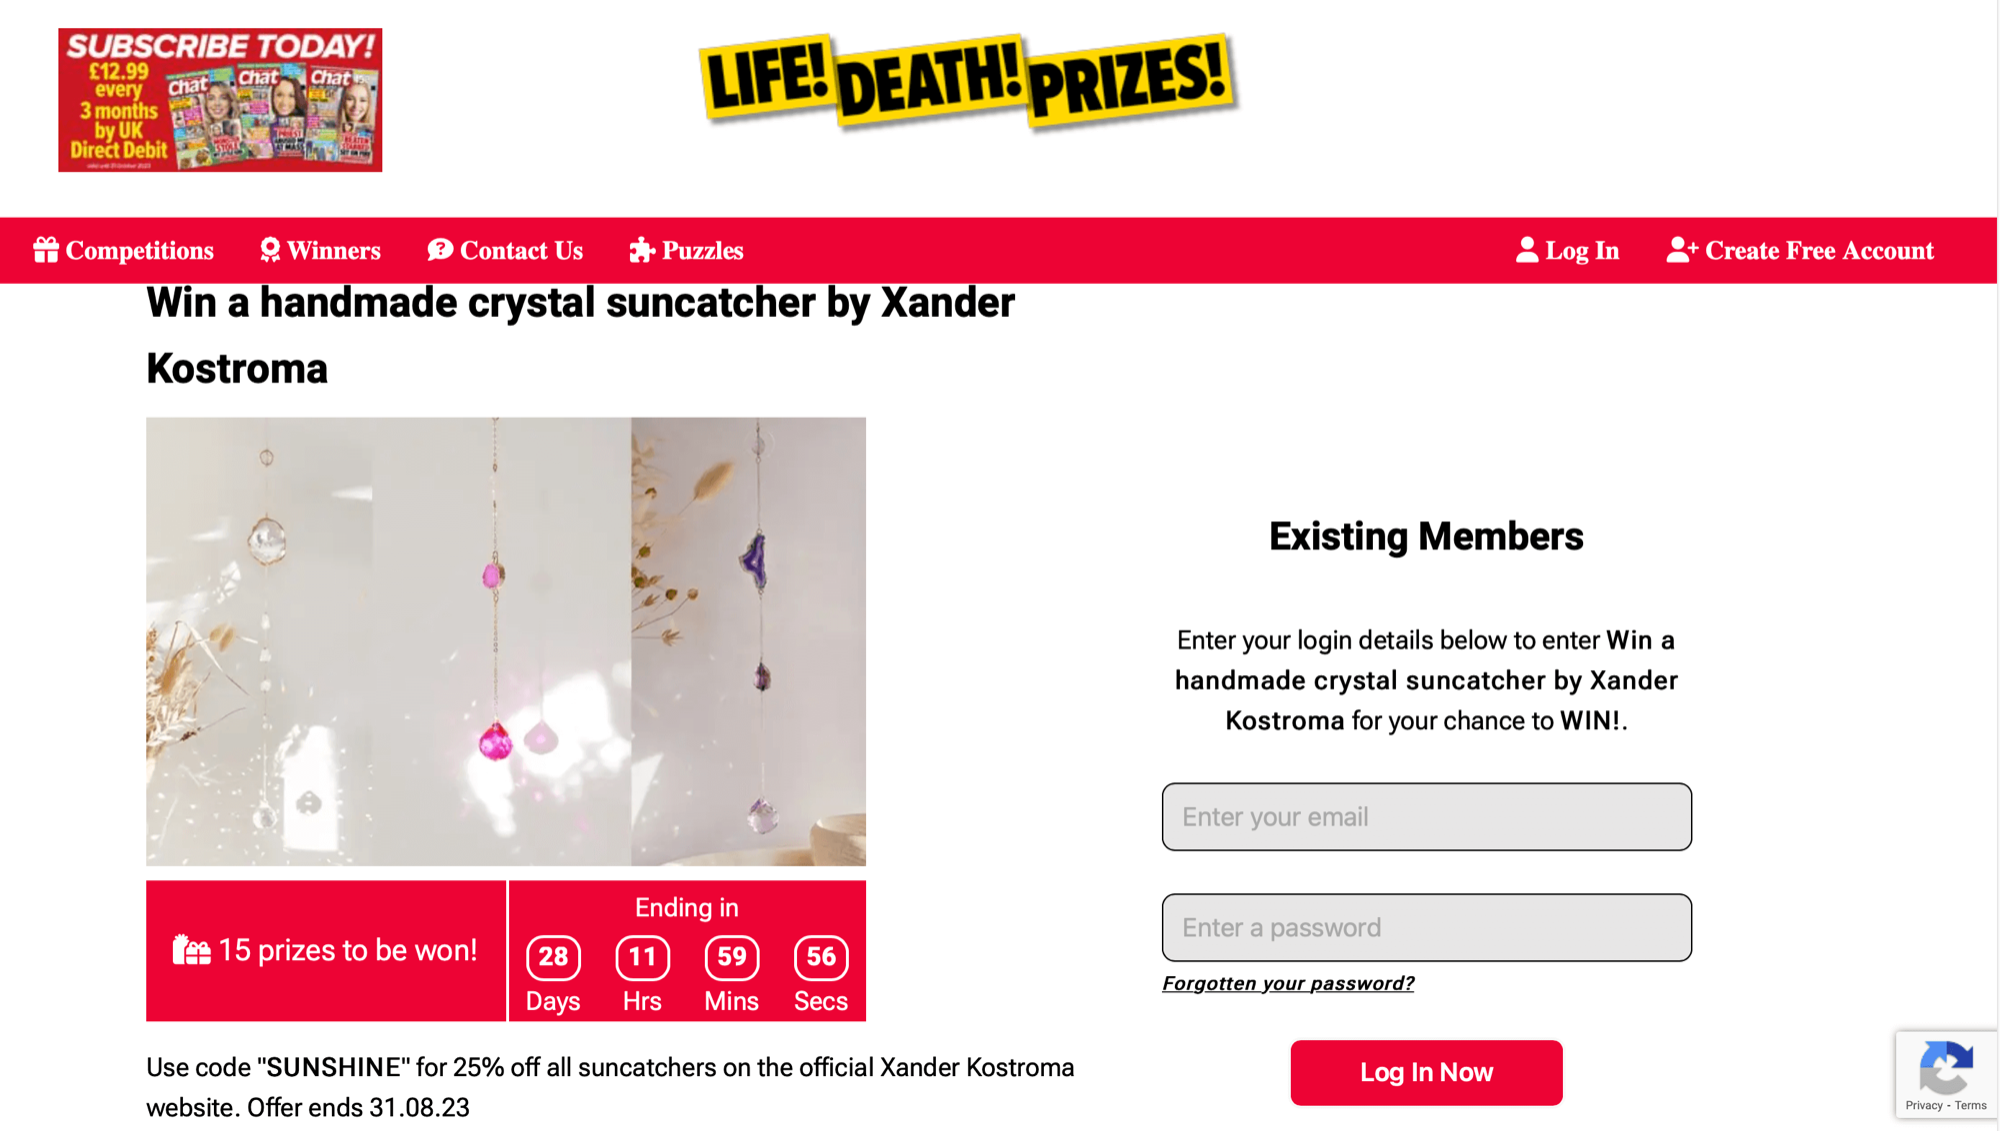 15 chances to win a Xander Kostroma suncatcher with Life Death Prizes